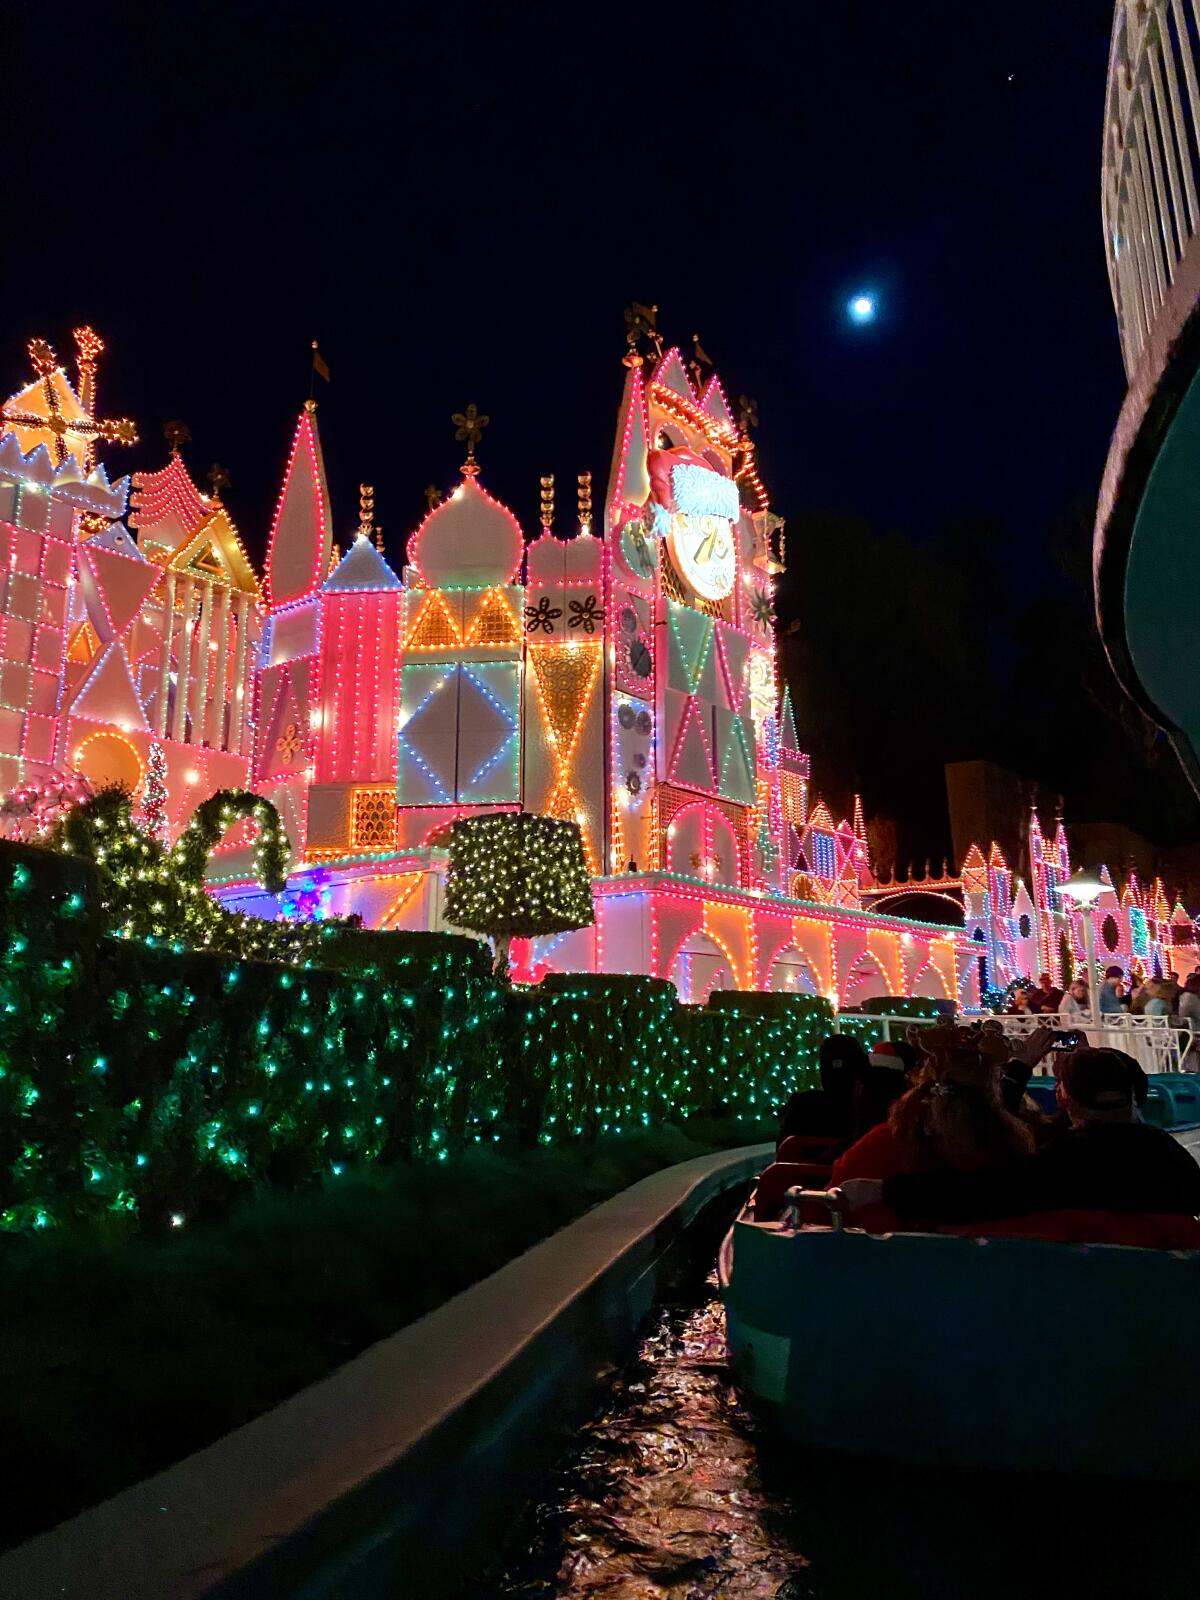 Lights on the façade of “It’s a Small World” at Disneyland for the holidays.